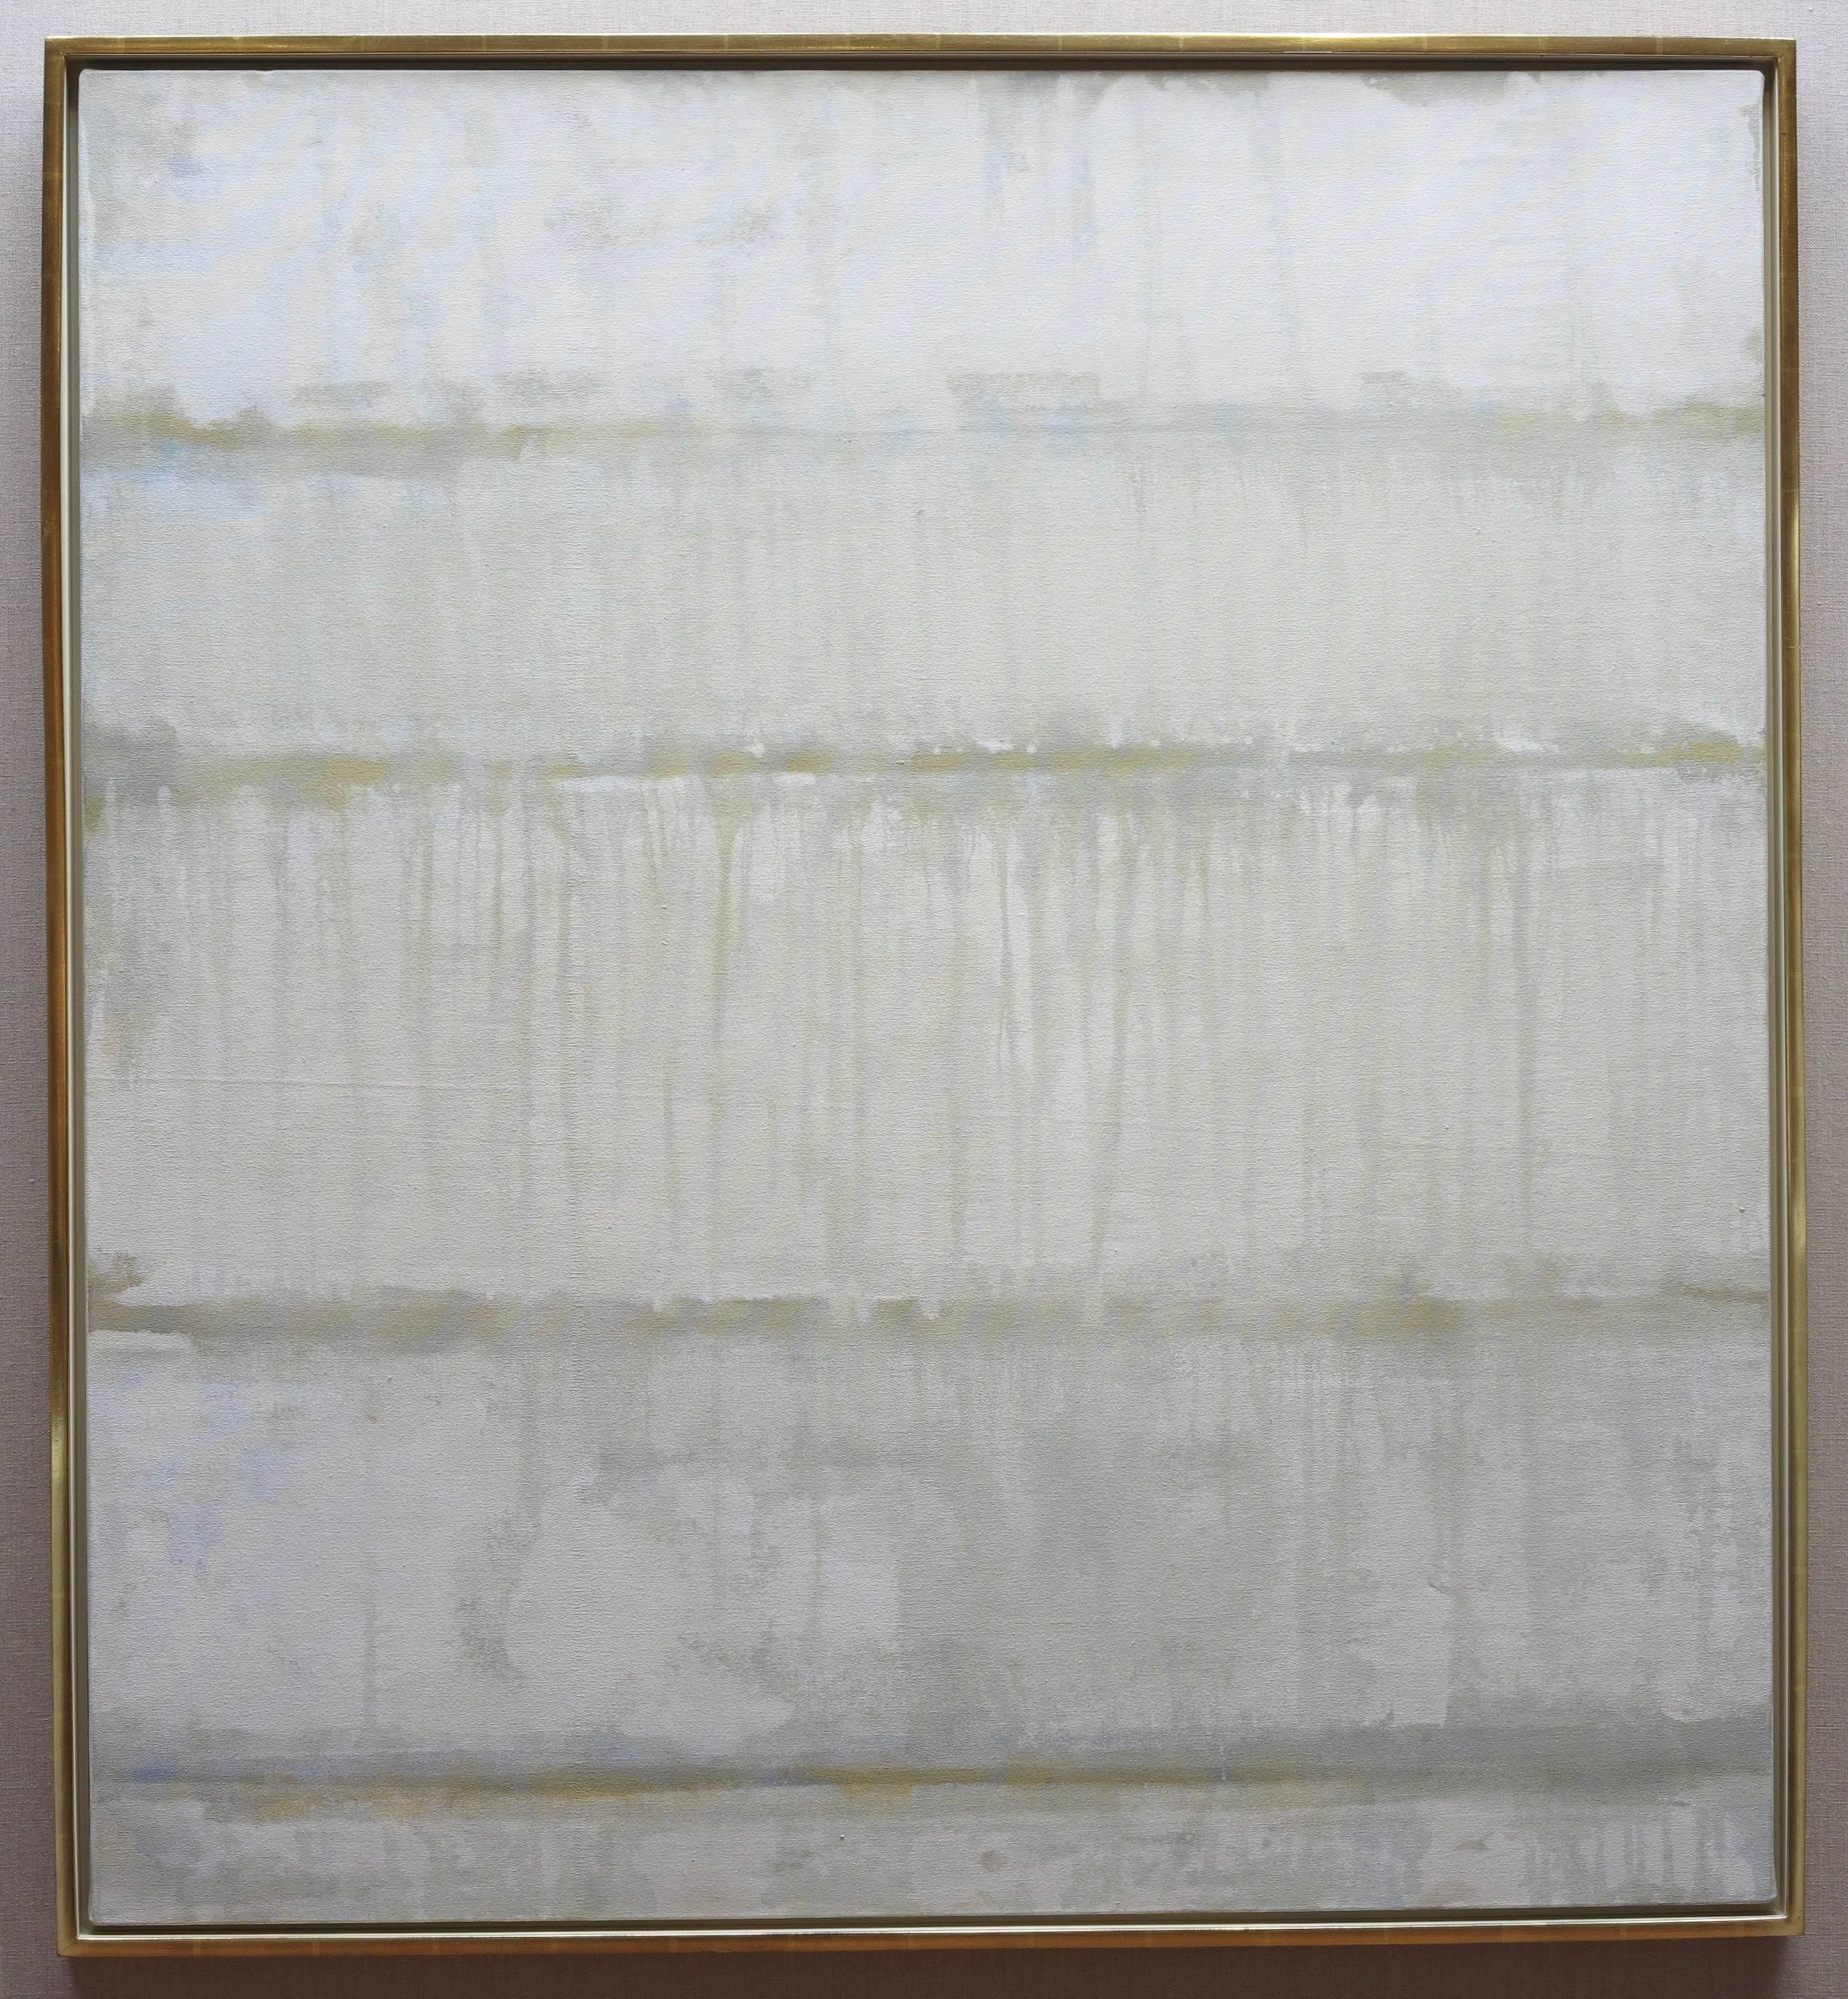 Untitled, 1974 - Painting by Willem de Looper